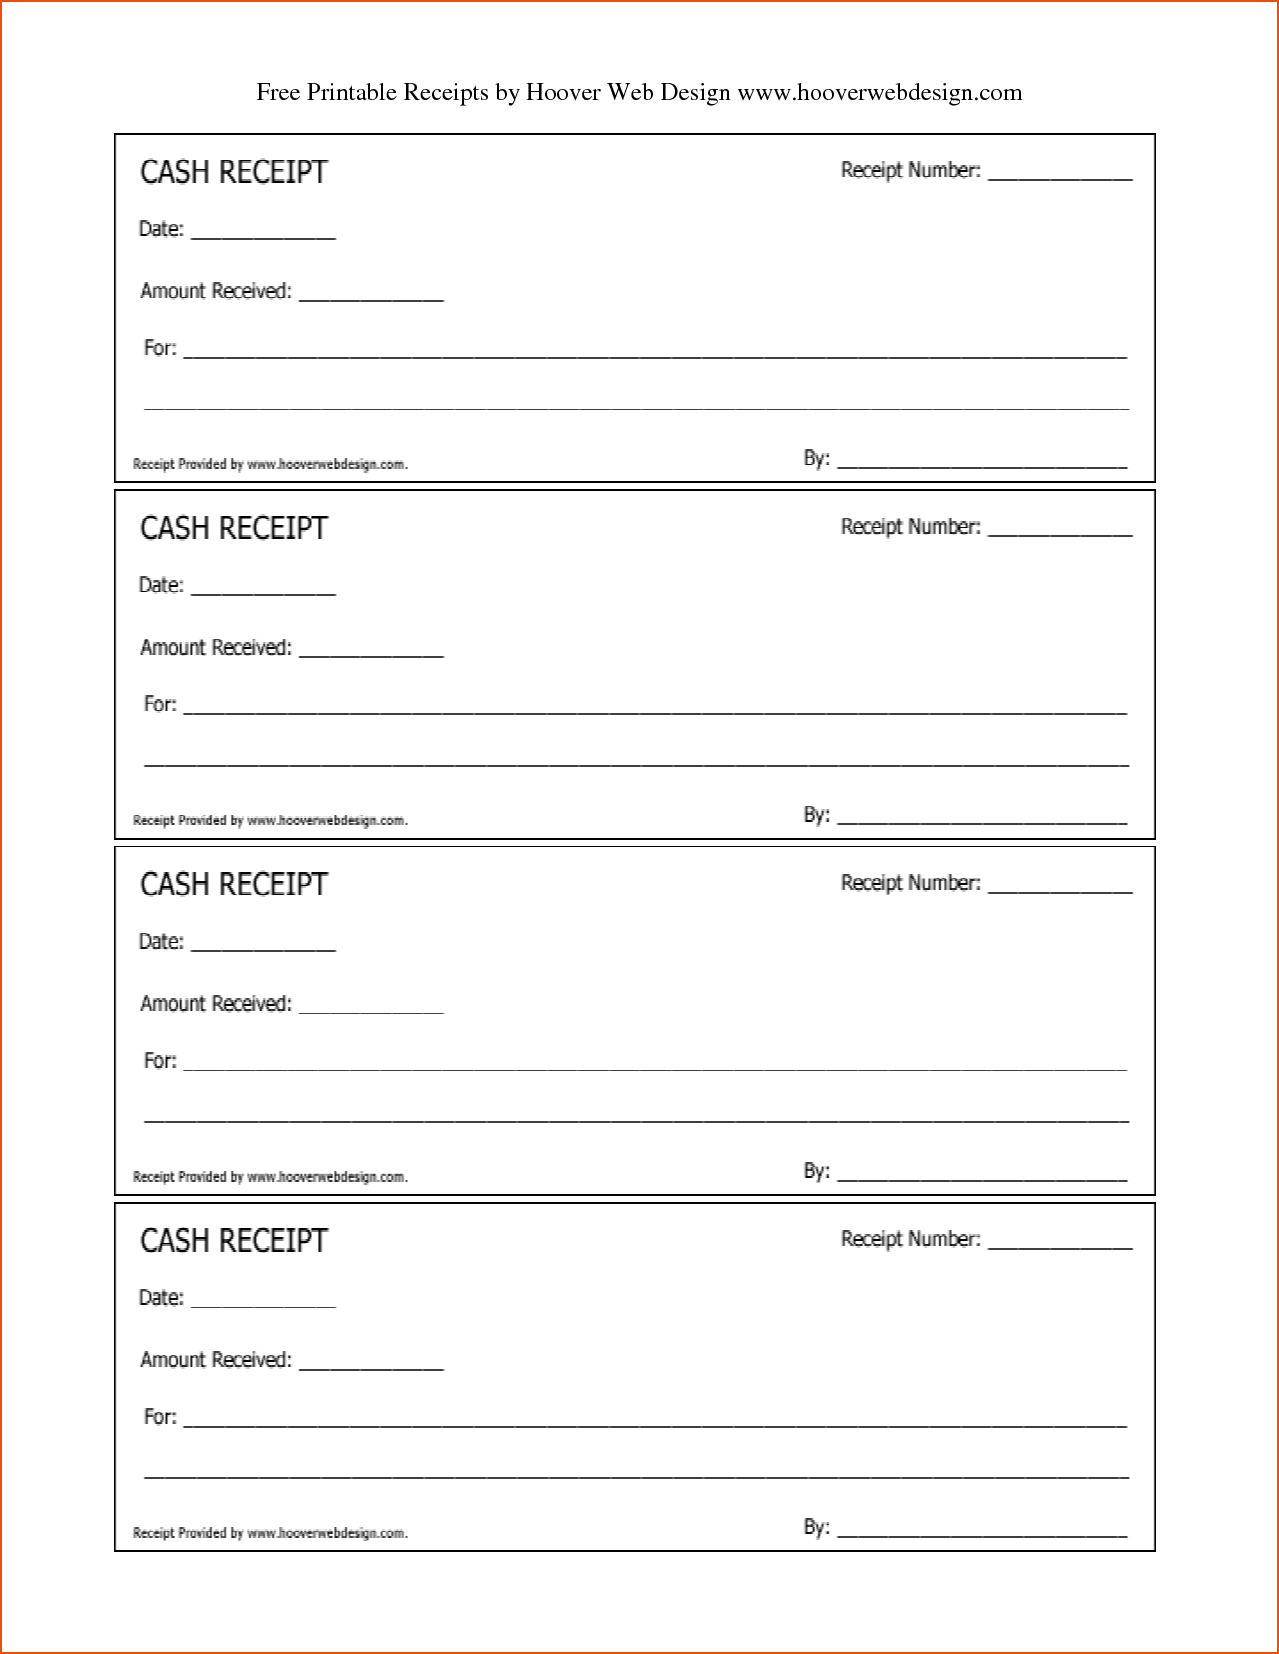 Free Printable Receipts For Services Feedback Templates Personal - Free Cash Book Template Printable